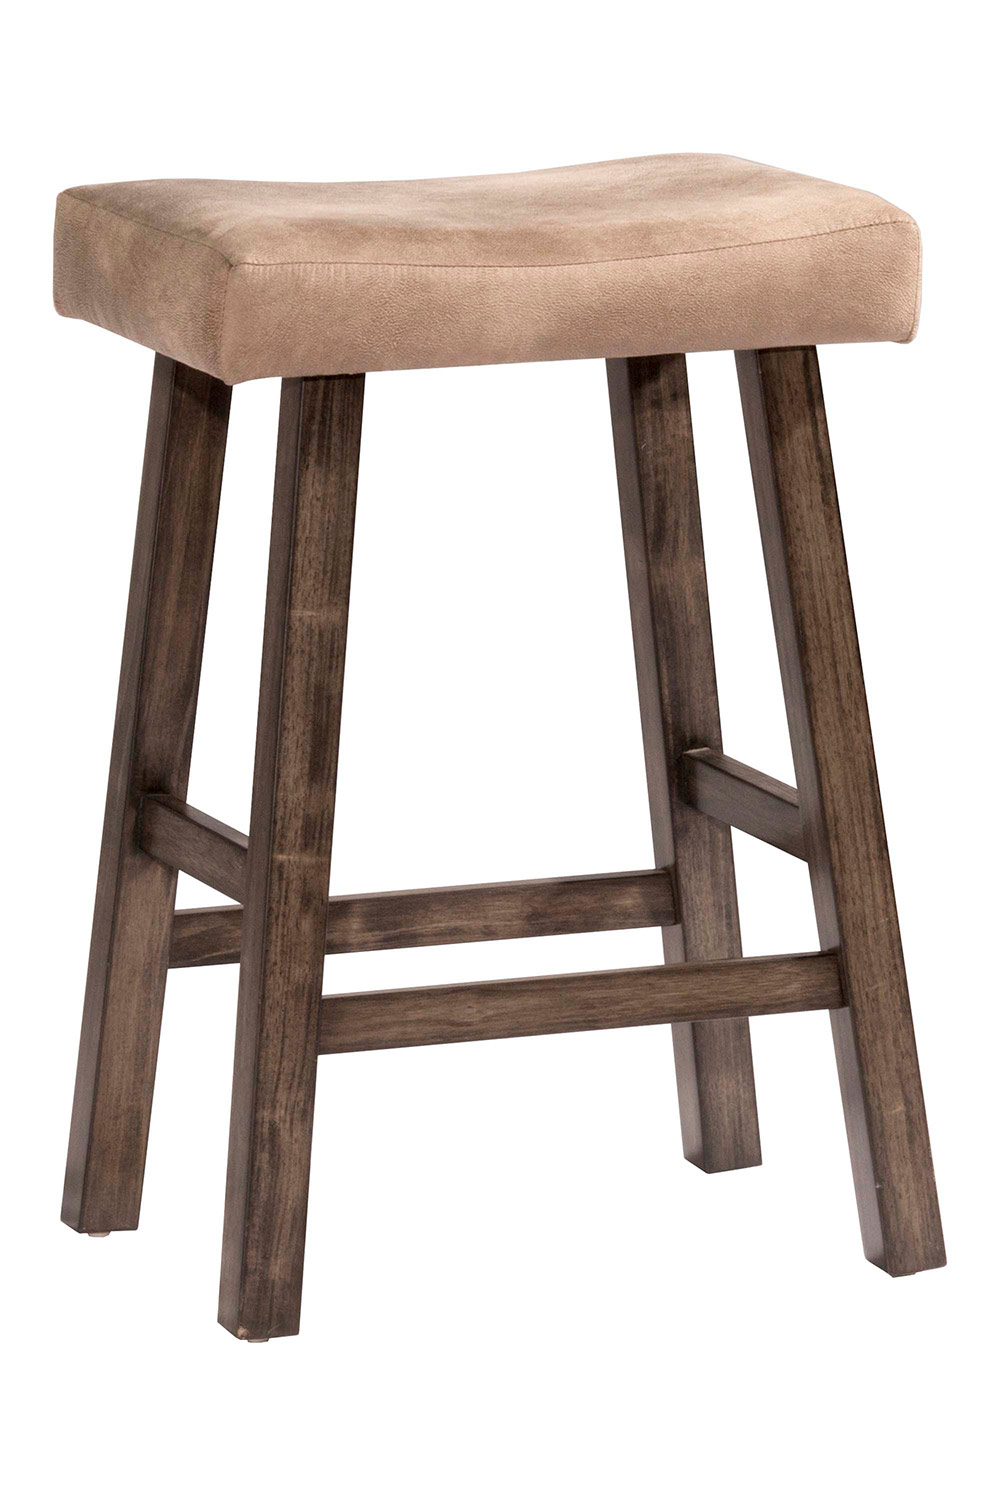 Hillsdale Saddle Non-Swivel Backless Bar Stool - Gray - Taupe Faux Leather